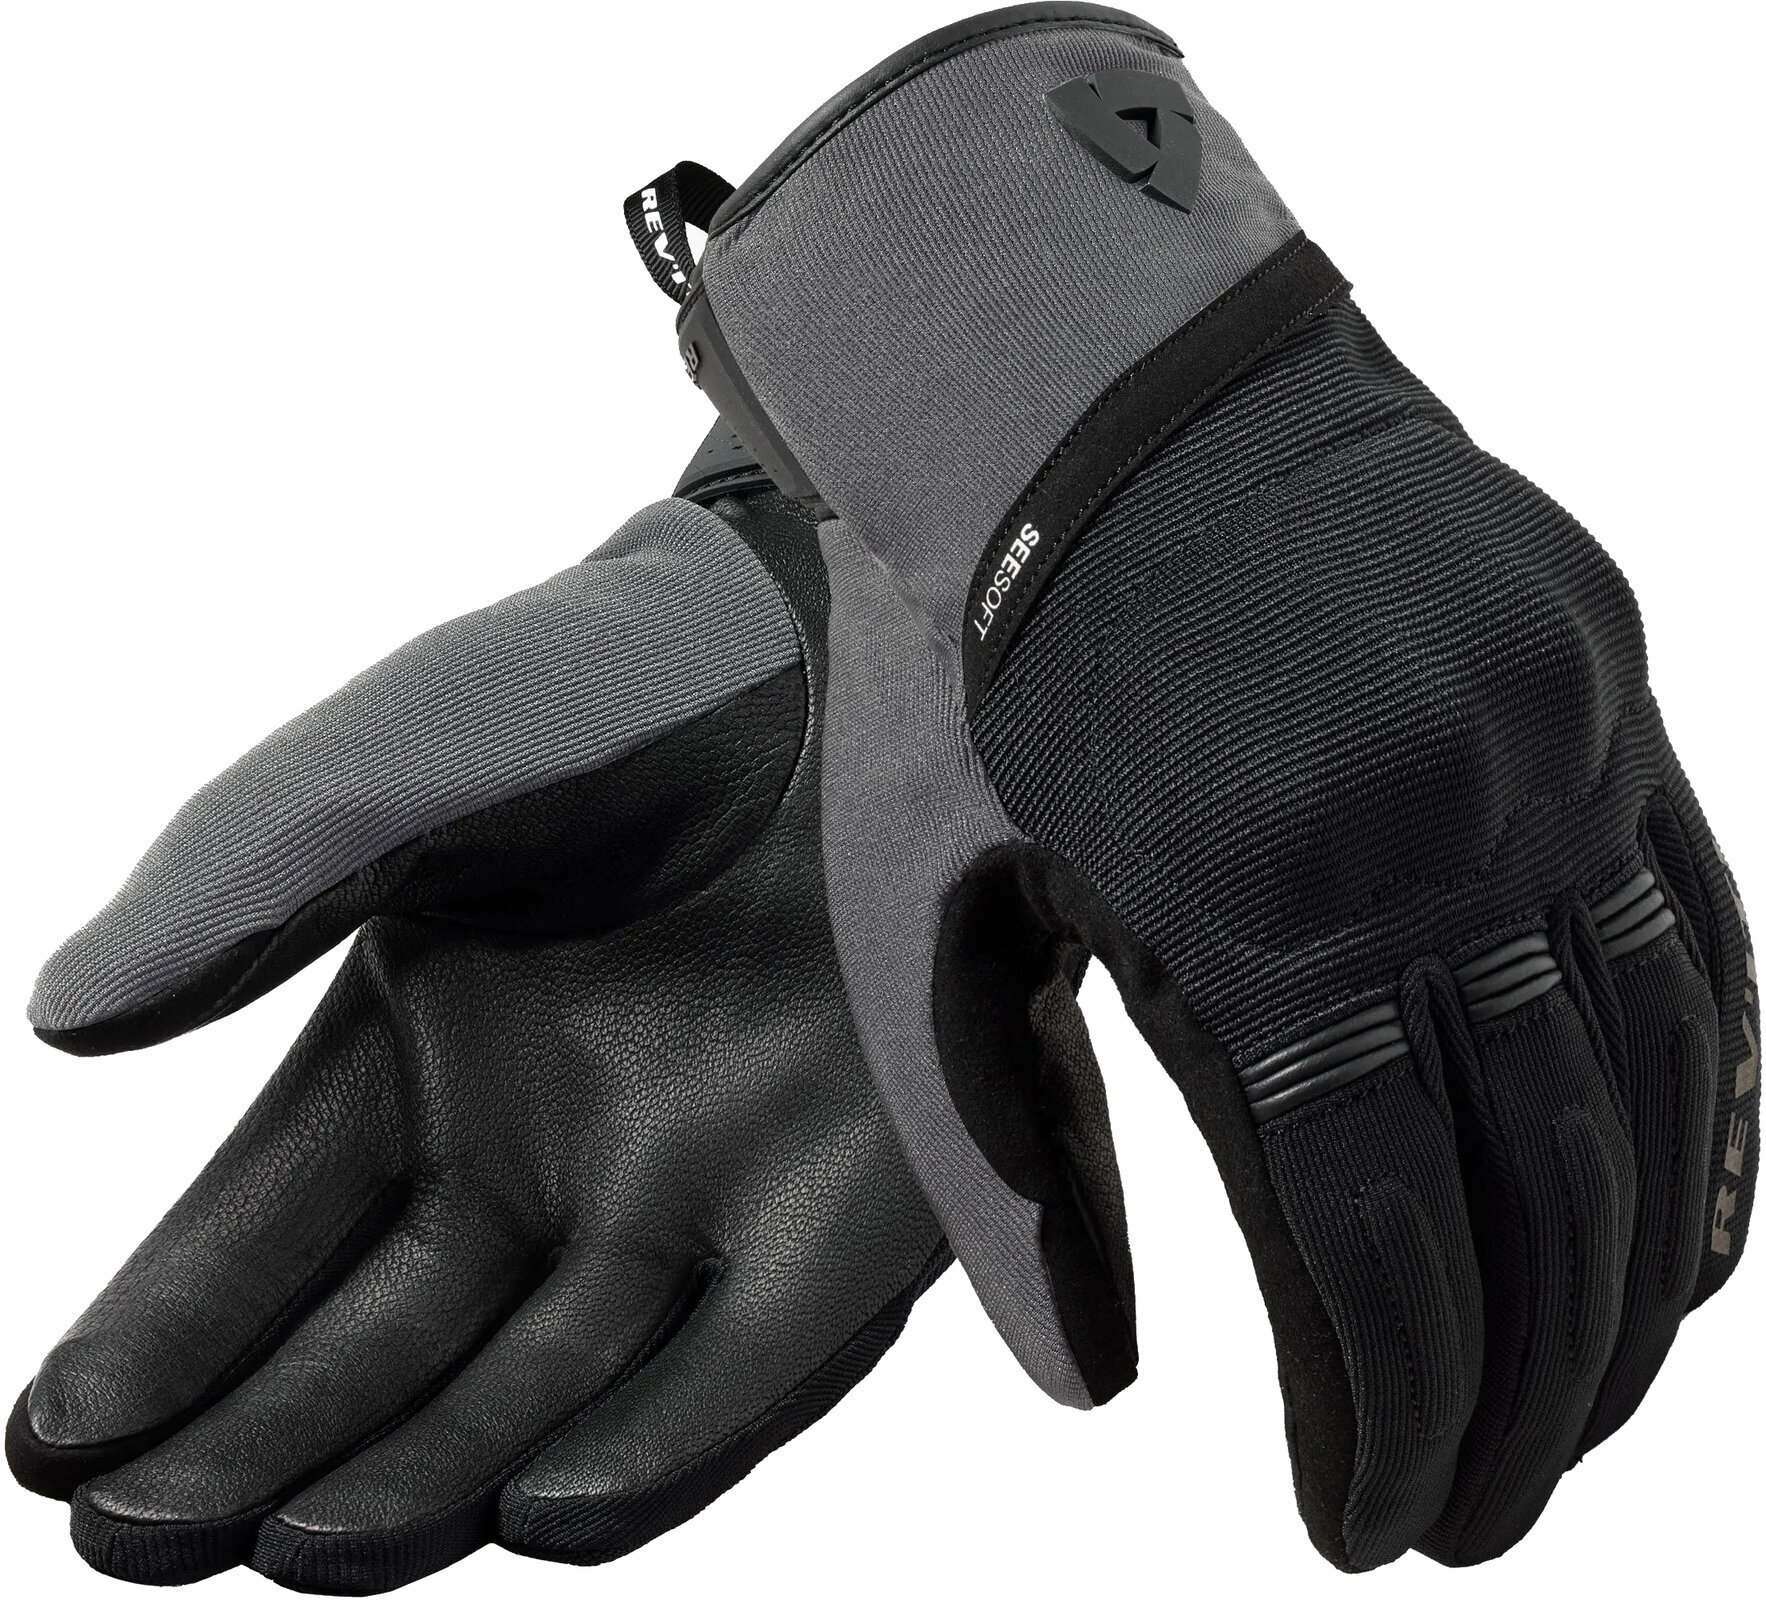 Motorcycle Gloves Rev'it! Gloves Mosca 2 H2O Black/Grey 2XL Motorcycle Gloves